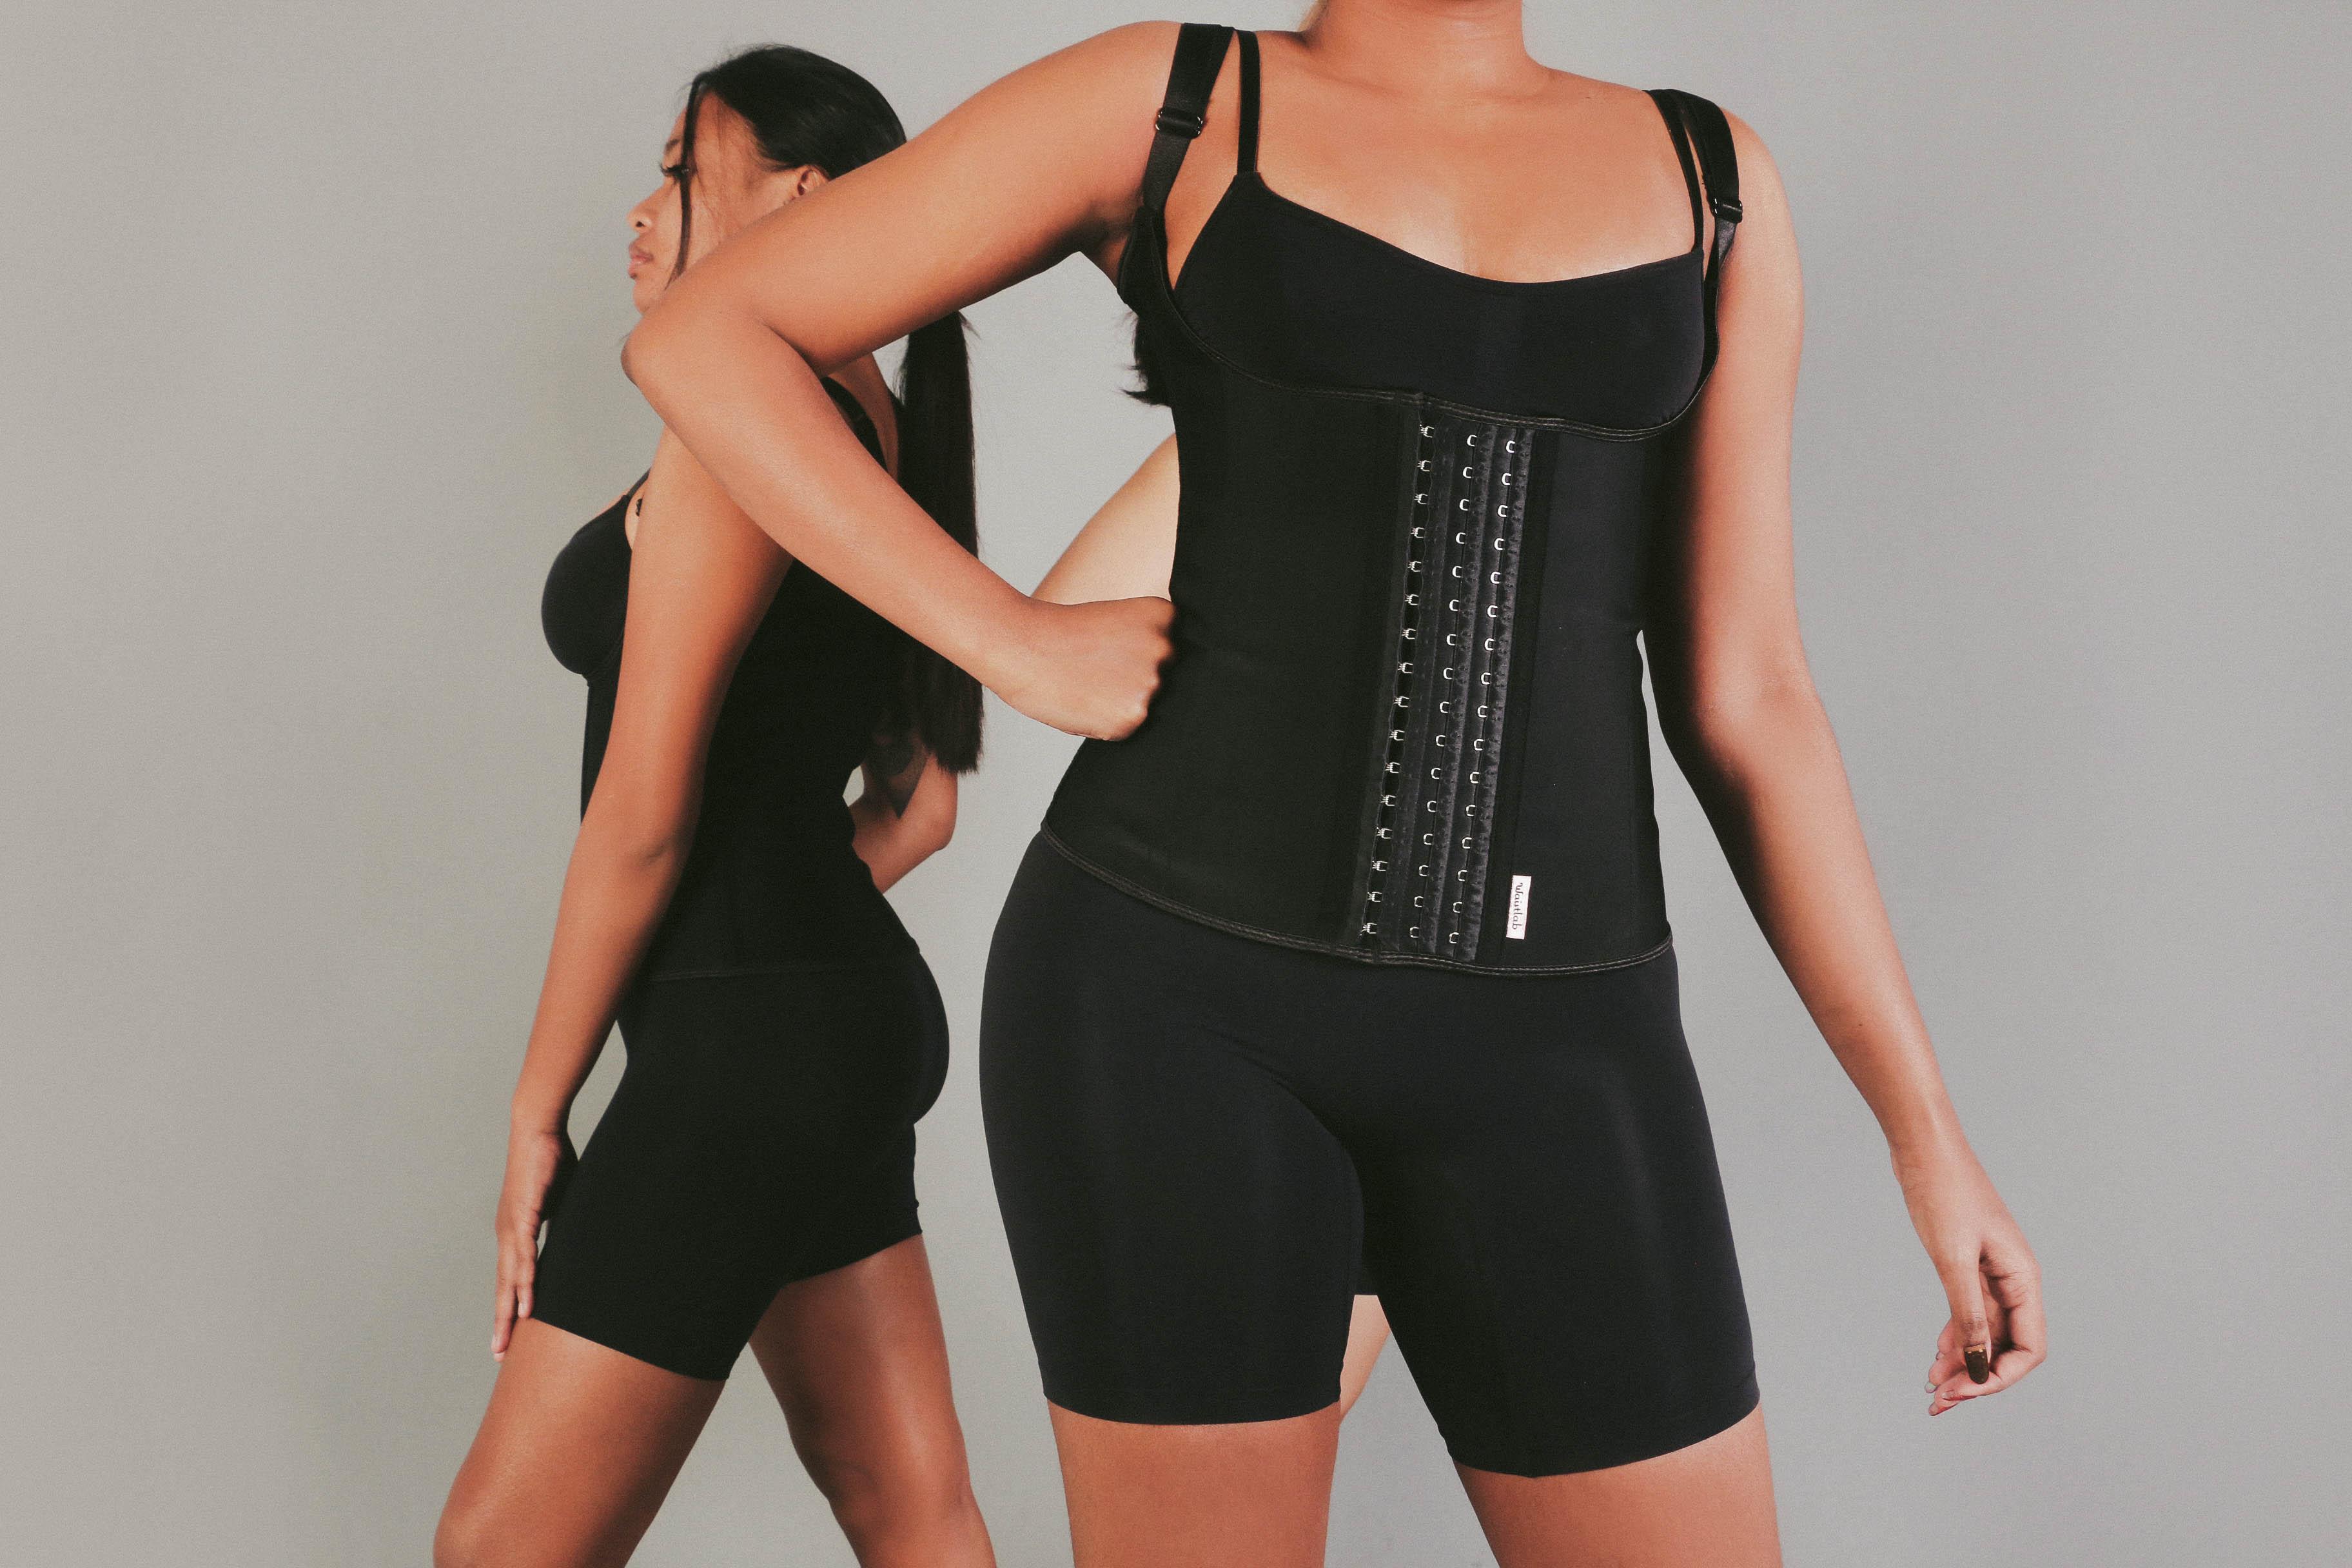 Waist Trainer Gone Wrong! You Will Not Believe These Mistakes